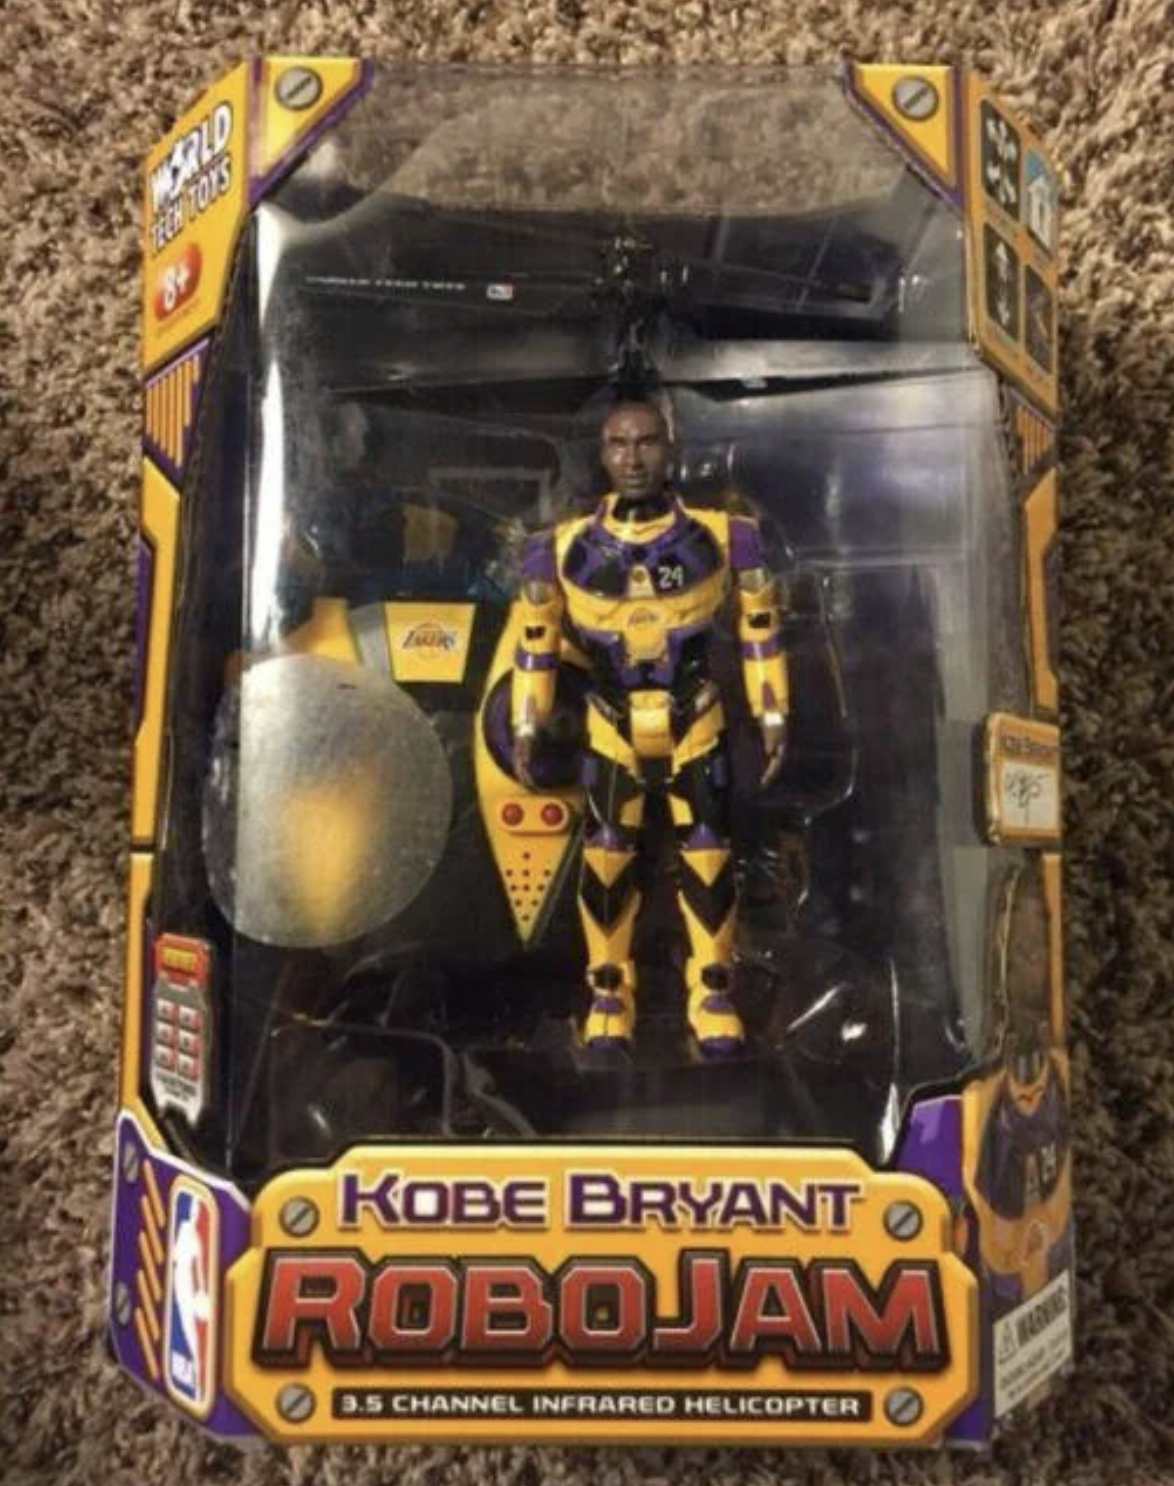 You are currently viewing Kobe Bryant – Robojam toy handout at his last NBA game, April 13, 2016 (what you never knew)